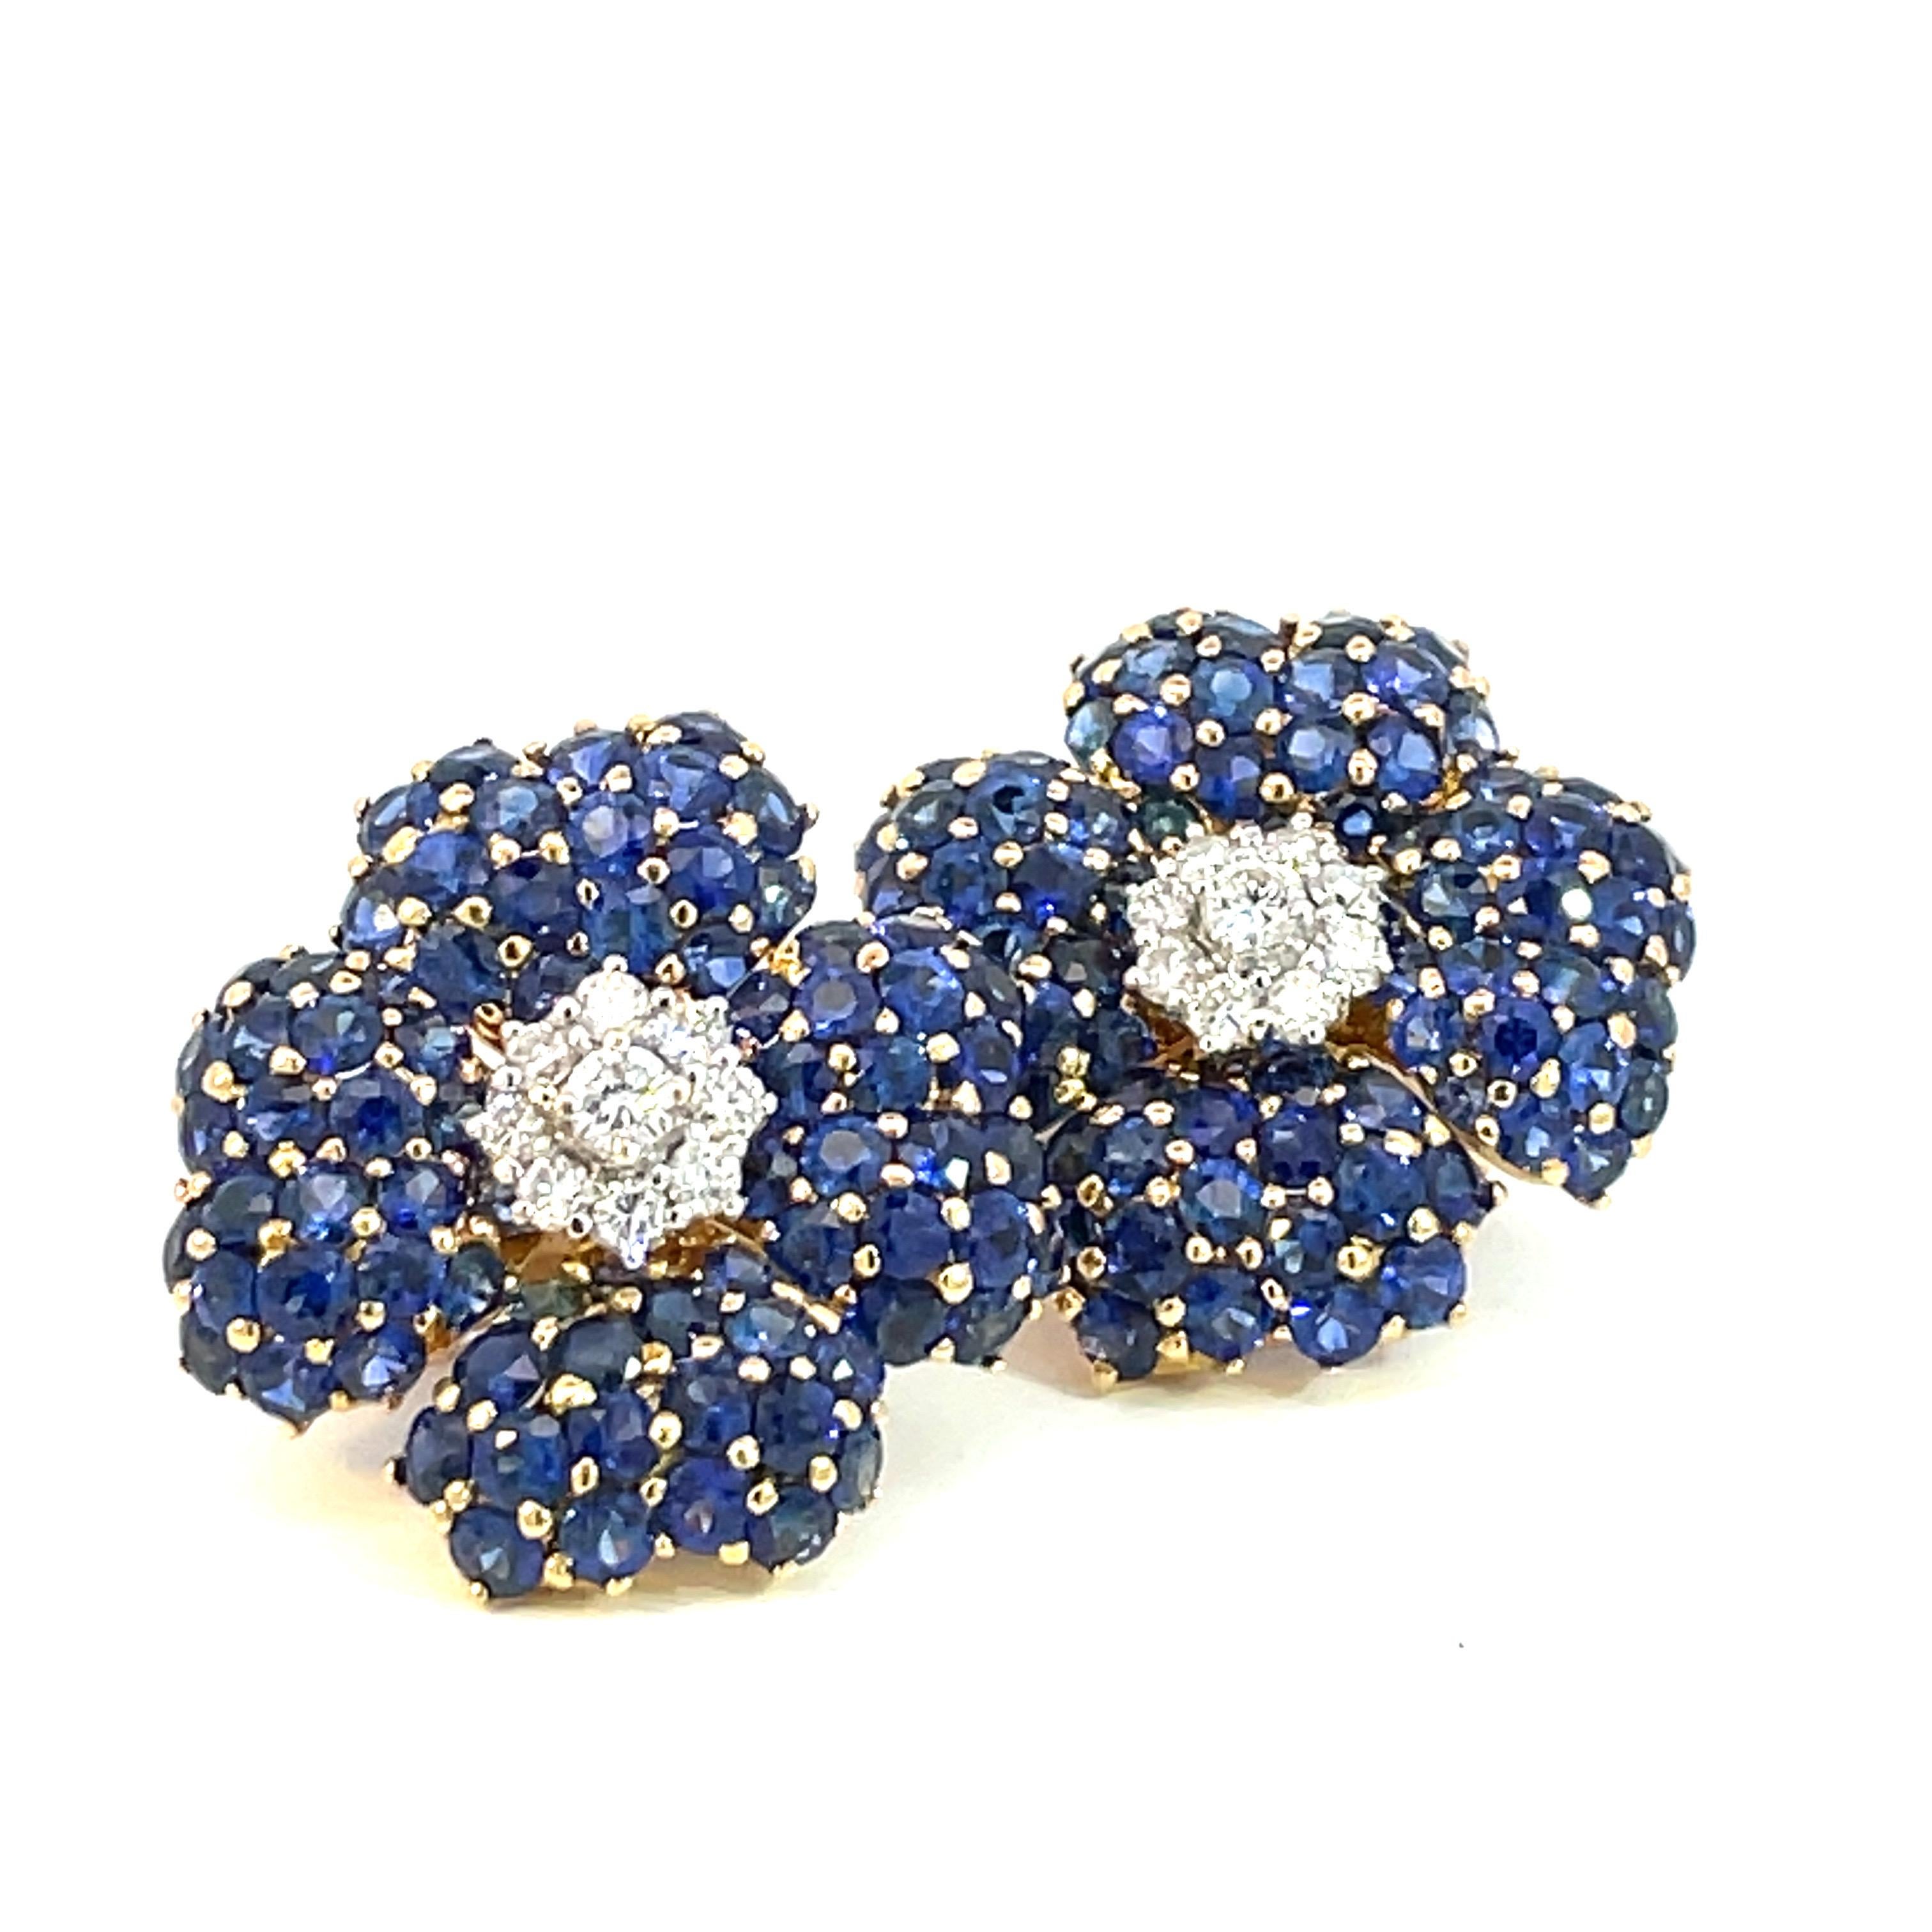 A large pair of natural blue sapphire and natural diamond earrings set in yellow and white gold with a beautiful honeycomb à jour finishing, a collapsable post and an ear-clip system.

18 Brilliant cut natural diamonds weighing 0.95ct total weight,